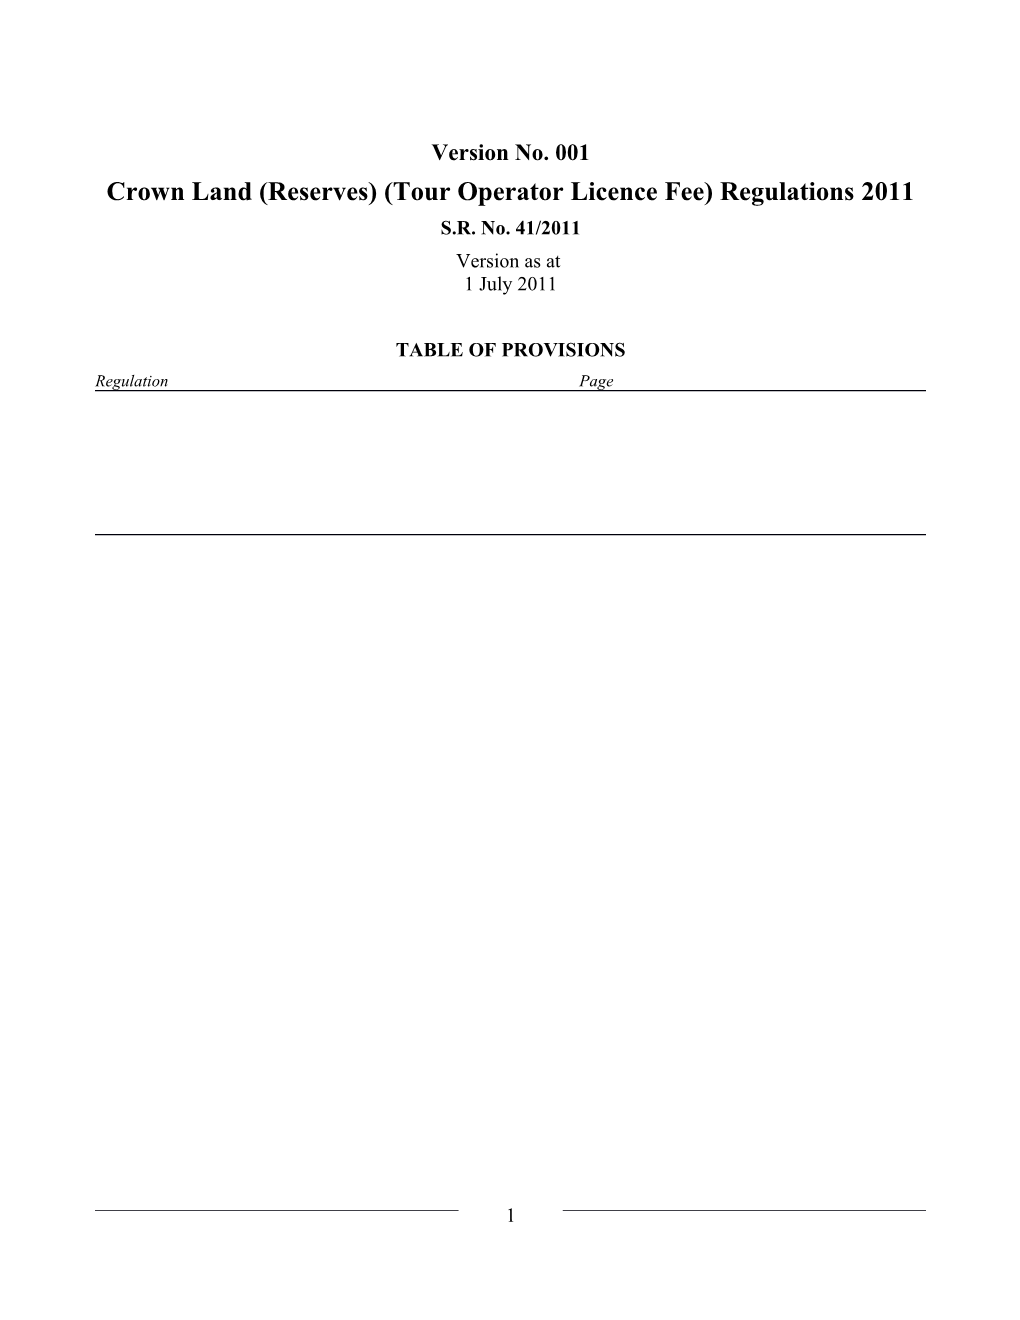 Crown Land (Reserves) (Tour Operator Licence Fee) Regulations 2011